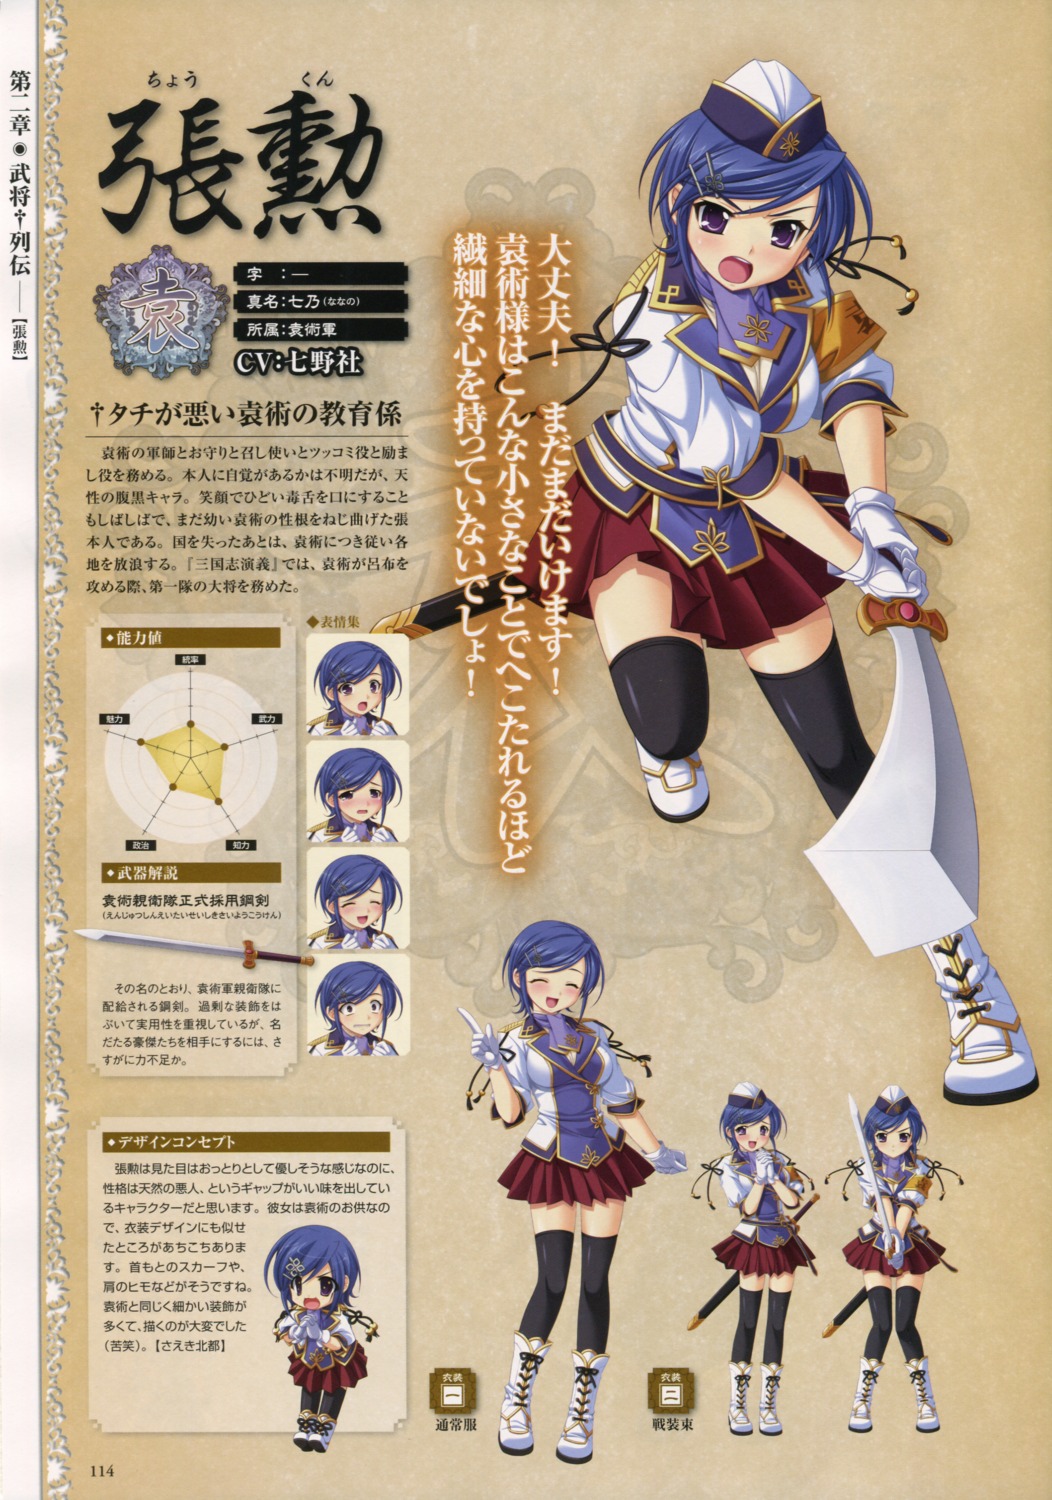 baseson character_design chibi choukun expression koihime_musou profile_page sword thighhighs